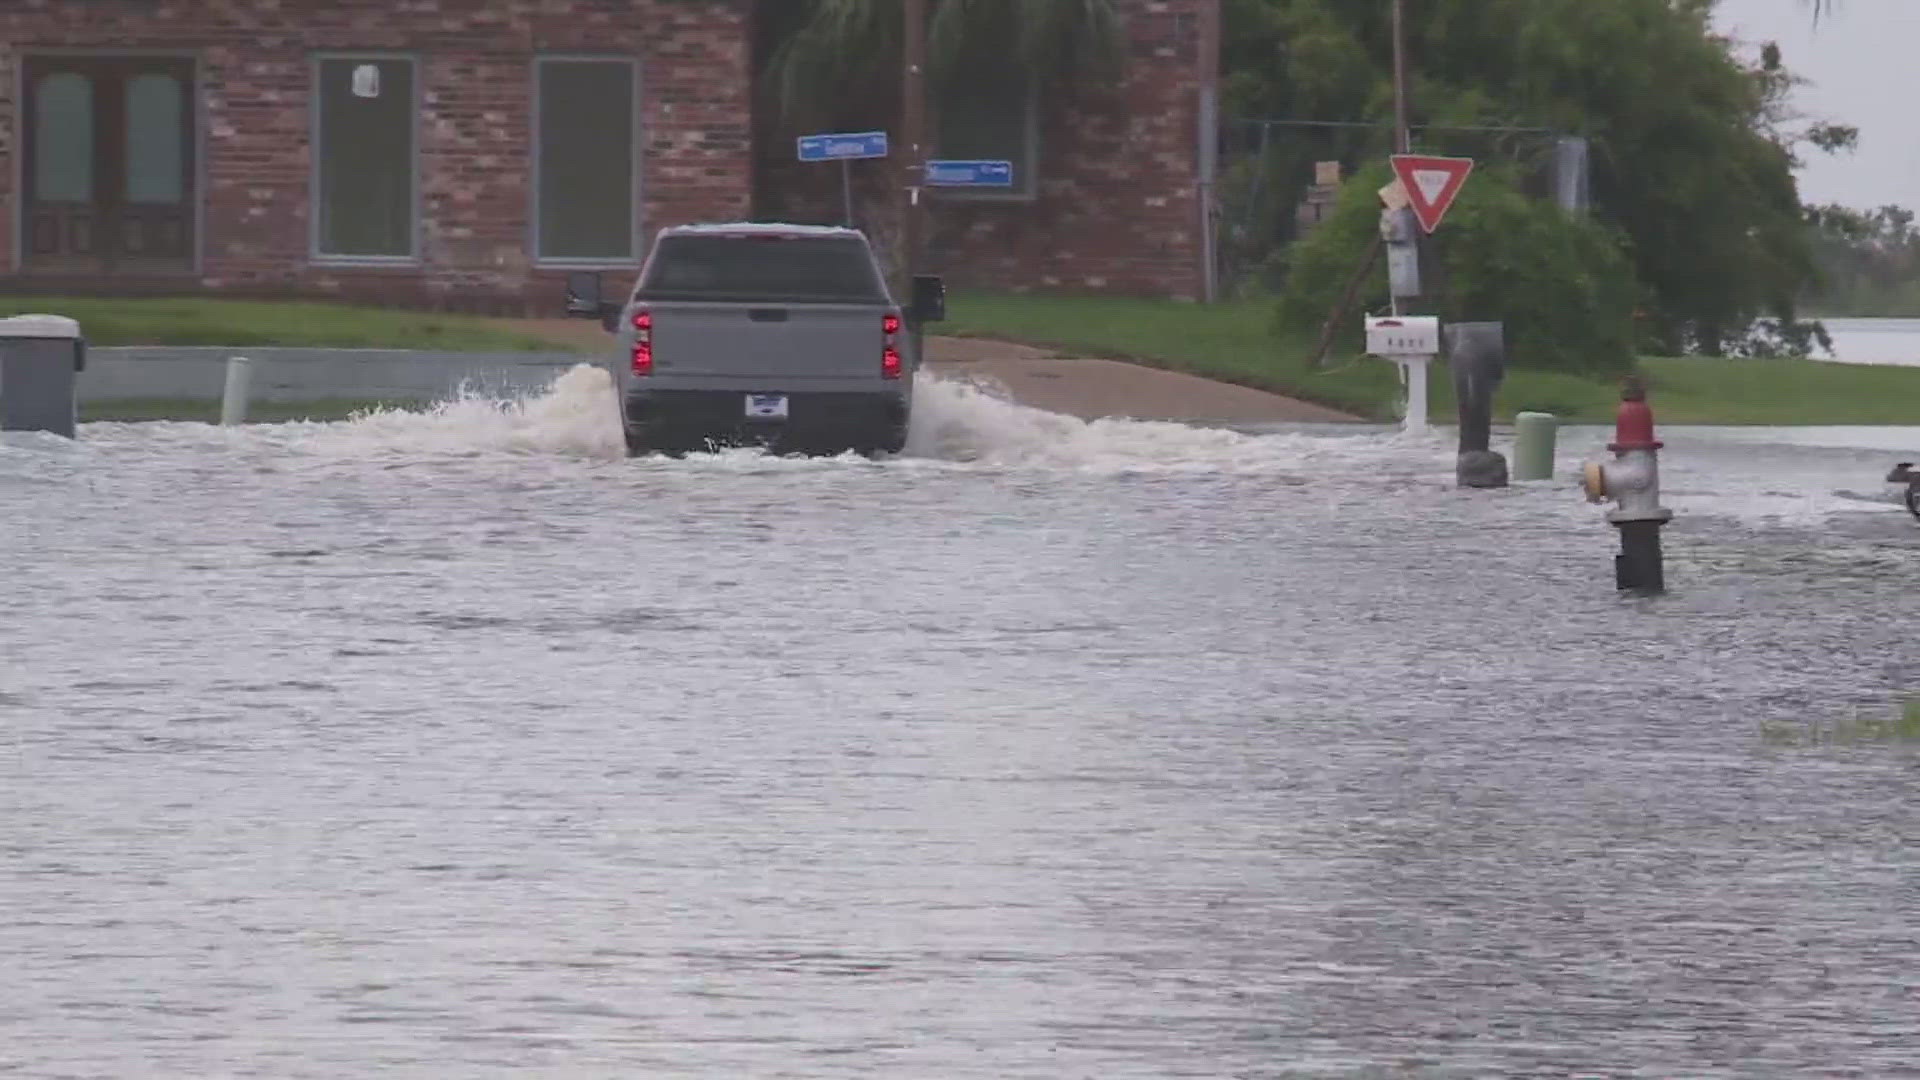 High winds and tides have pushed water over some of Louisiana's coastal roads from Tropical Storm Alberto.